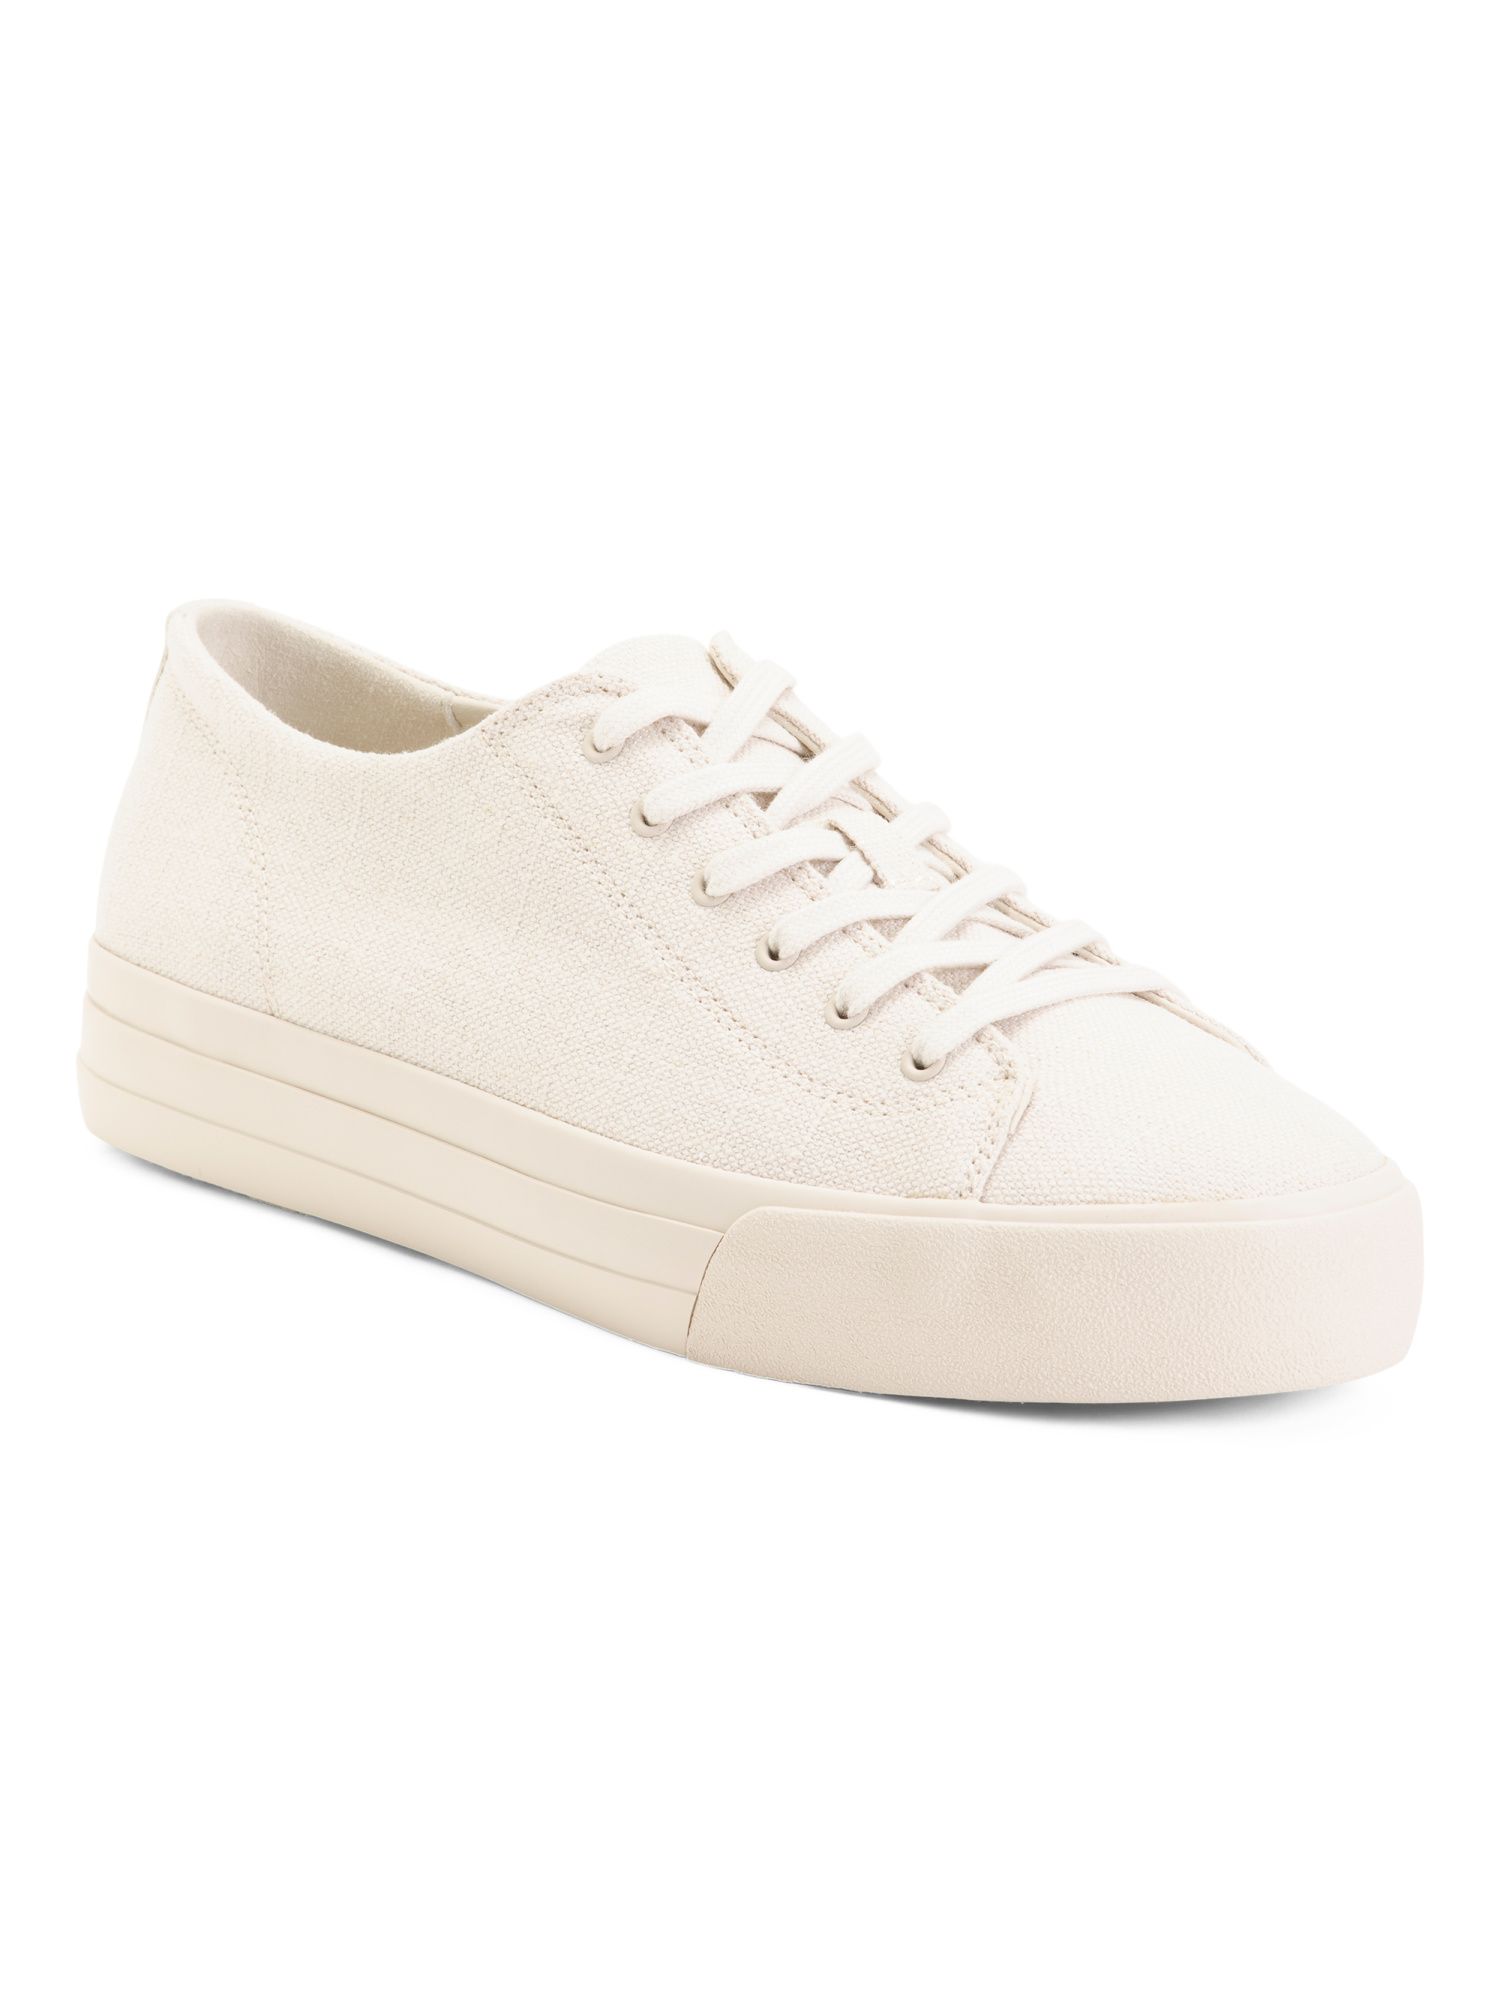 Weave Lace-up Sneakers | TJ Maxx